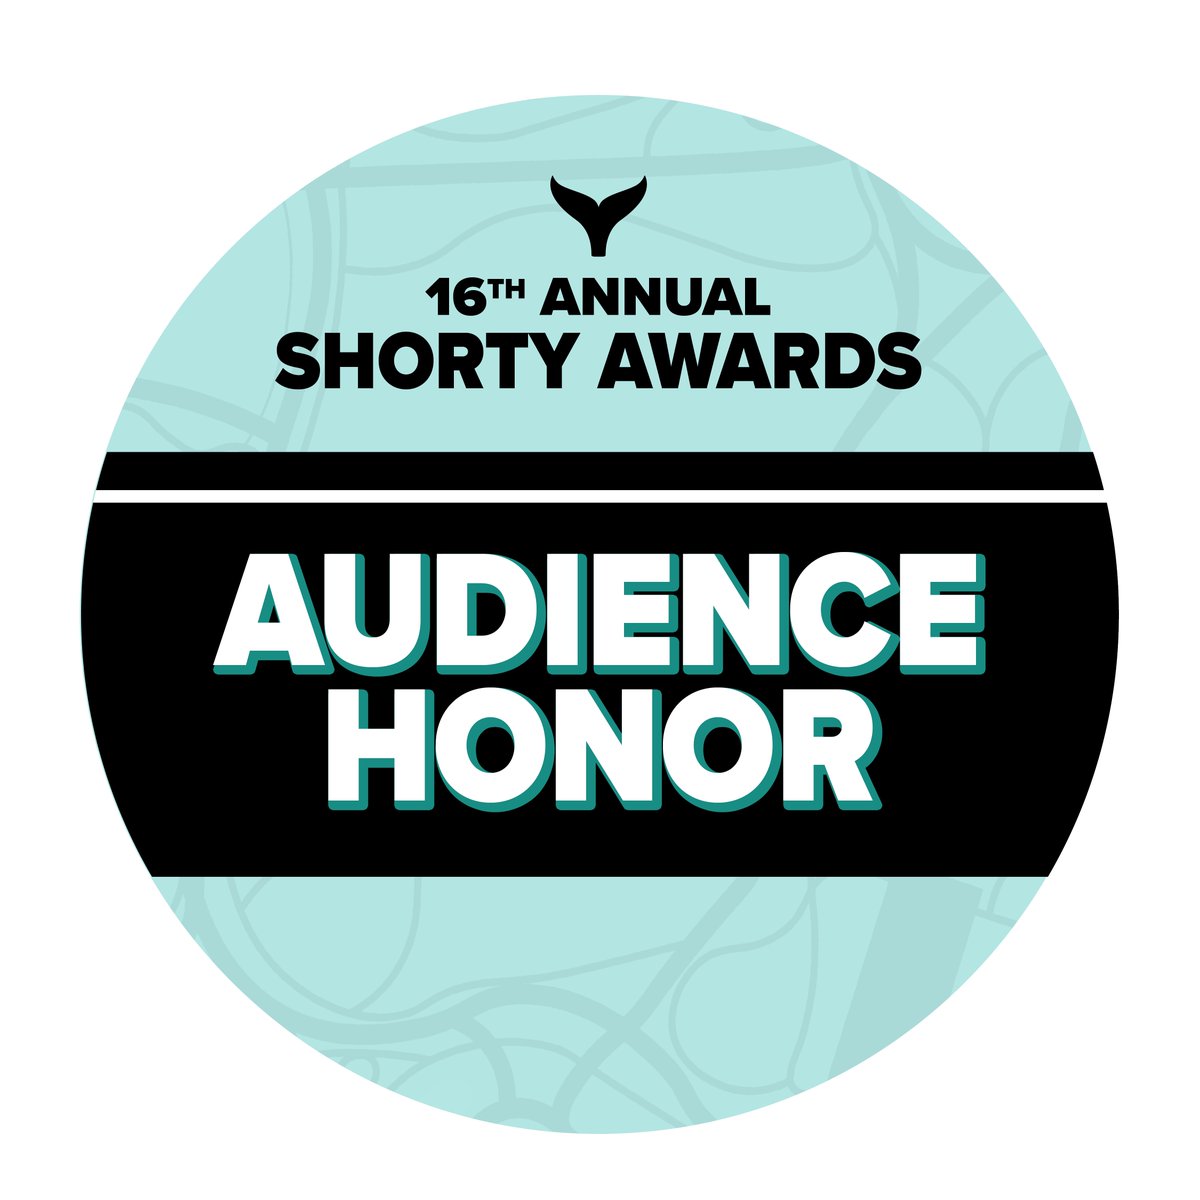 Big news! #NYCCare is an Audience Honoree in the Local Campaign category 🚀 Big thanks to everyone who voted for us! on.nyc.gov/444iJ3i #shortyawards #audiencehonor